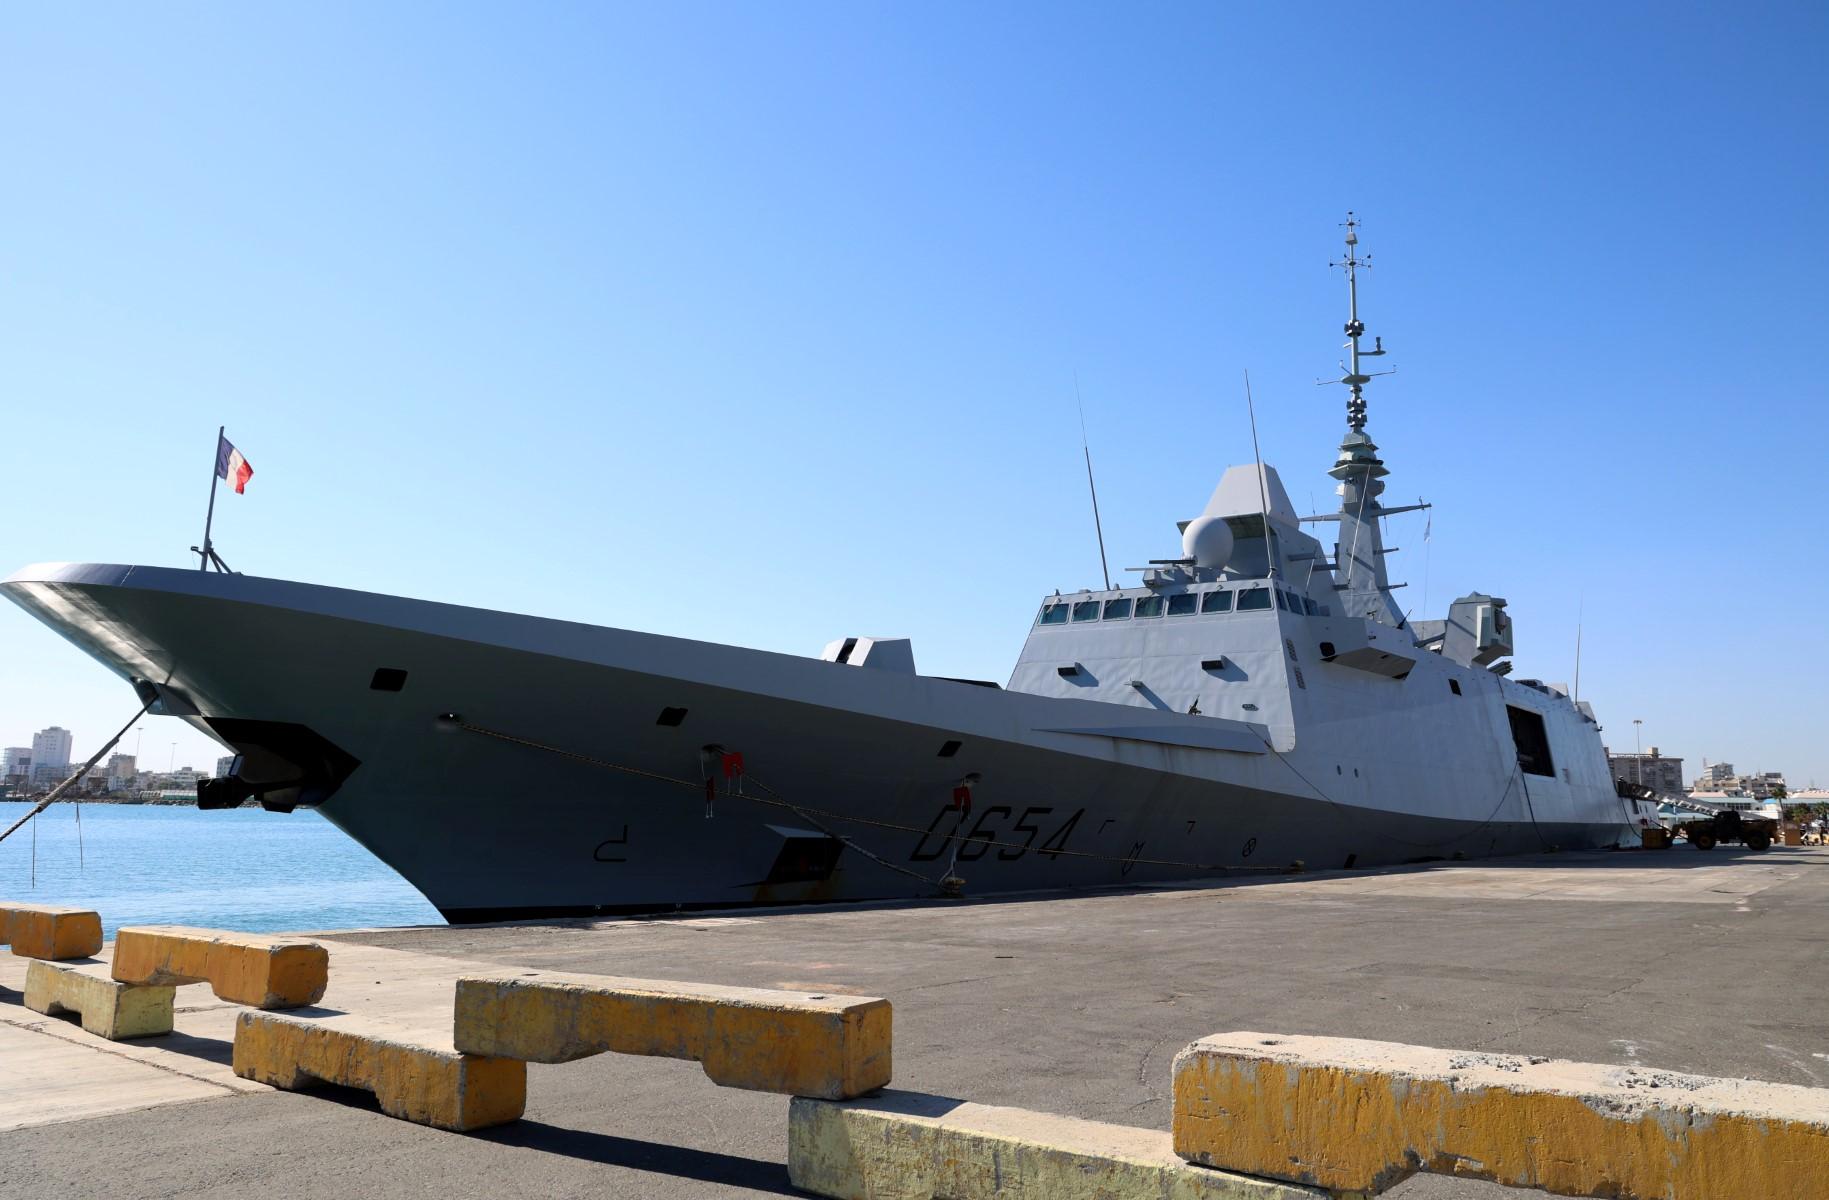 The French multi-mission frigate Auvergne is docked at the port of the Cypriot coastal city of Larnaca, on Nov 8. Photo: AFP